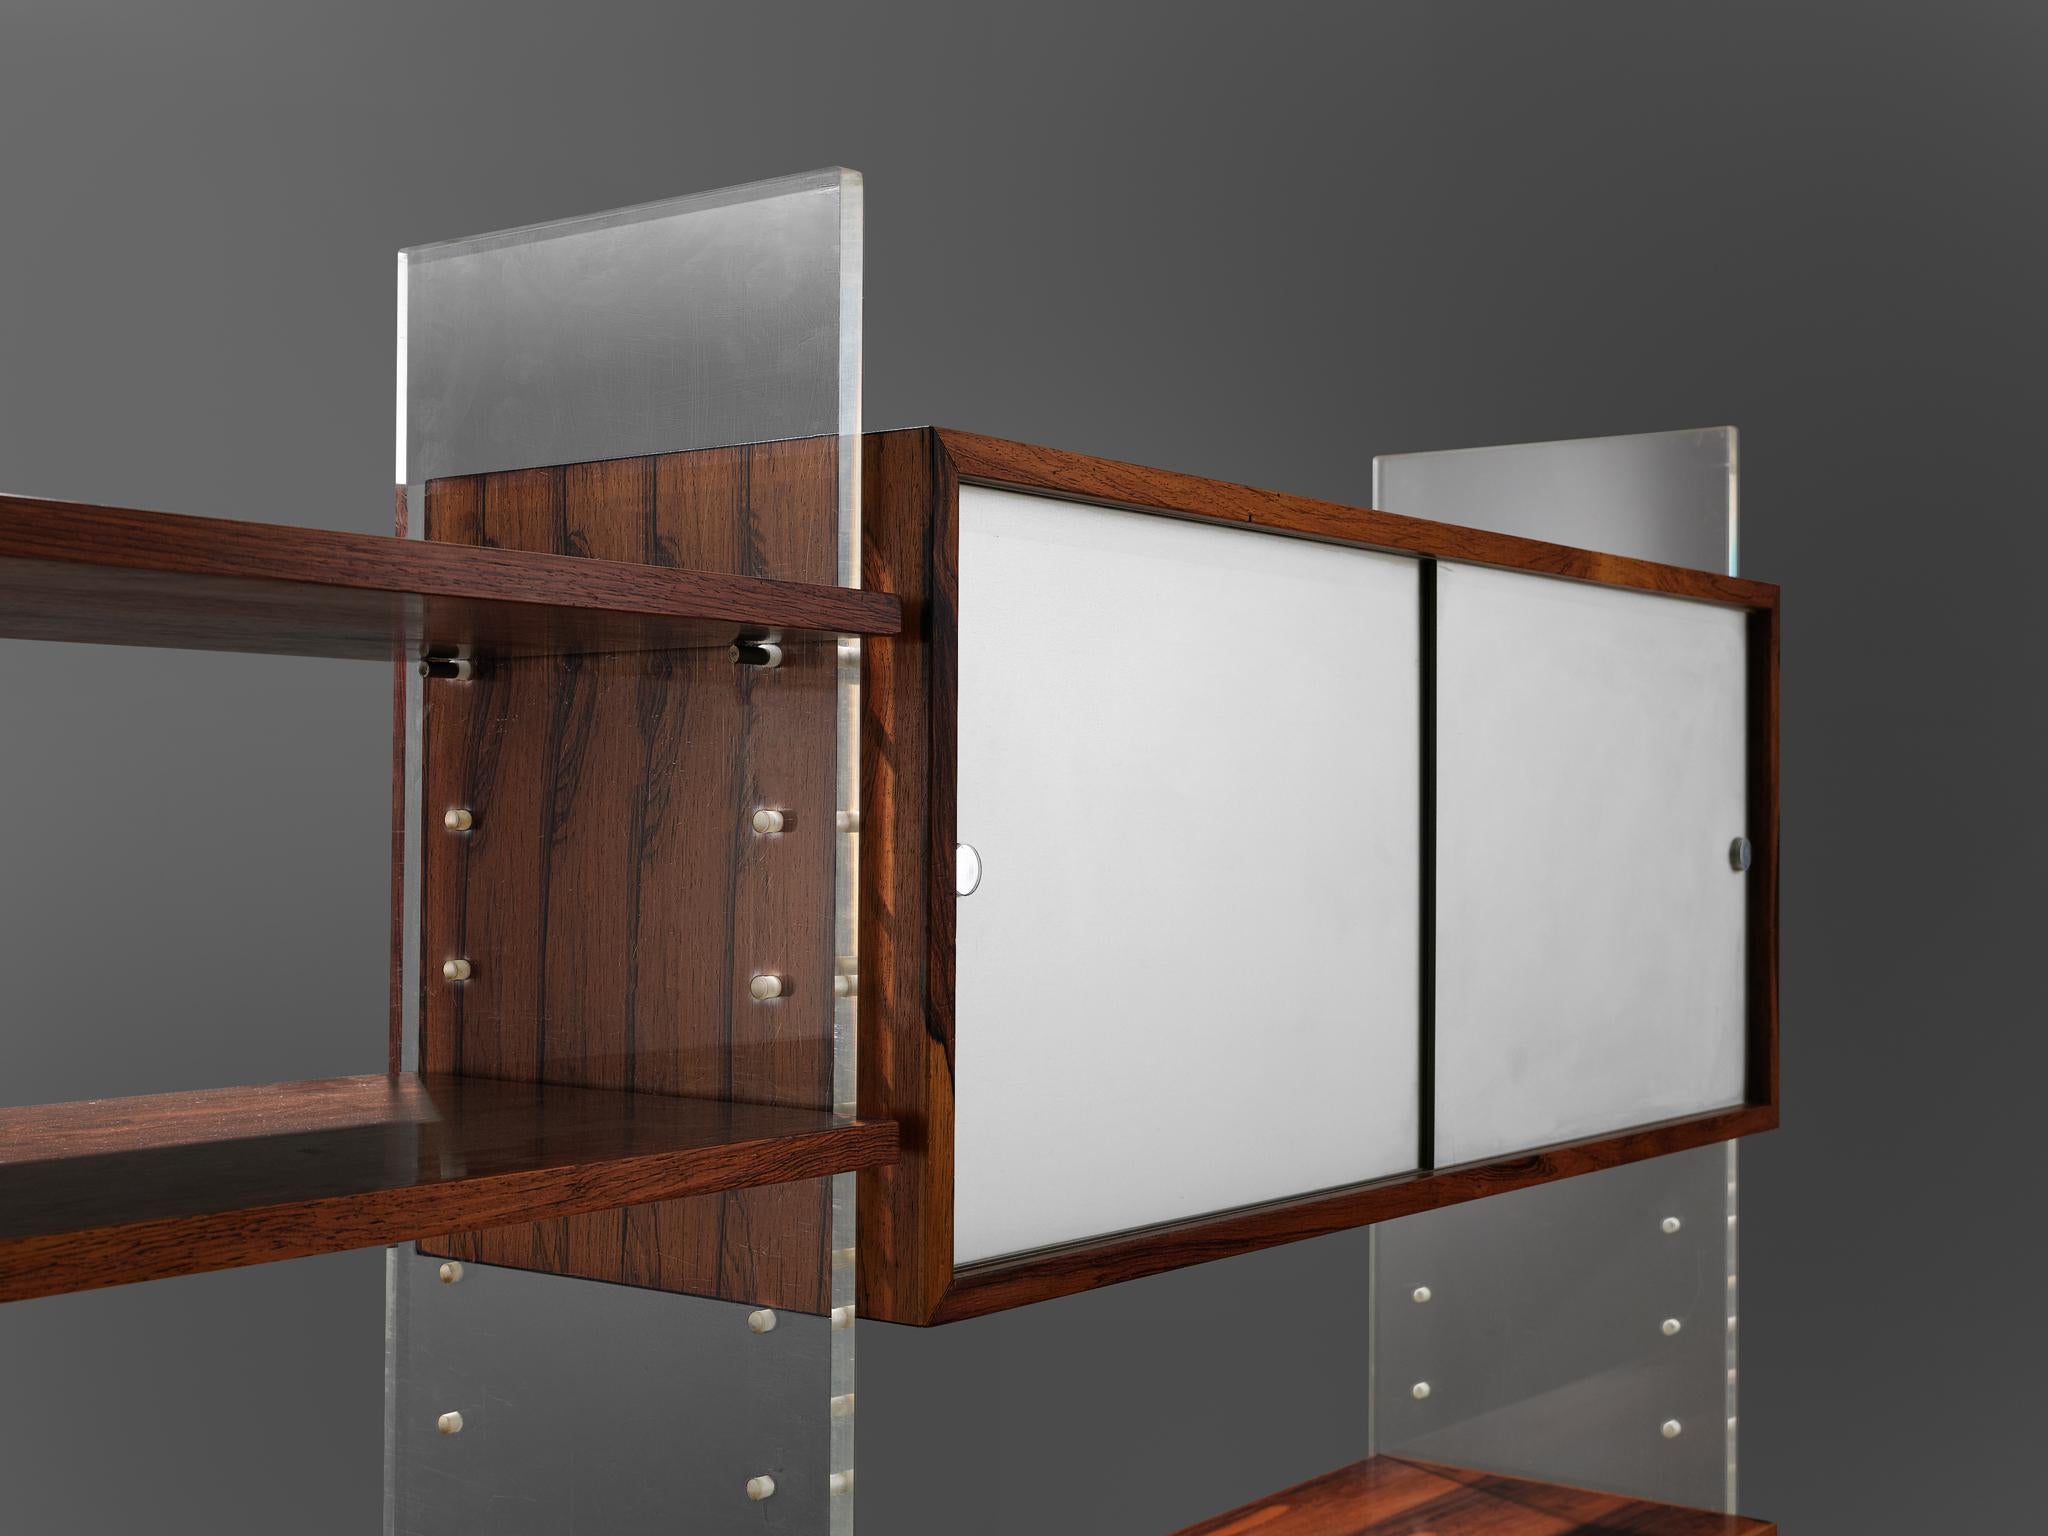 Aluminum Poul Norreklit Wall Unit in Plexiglass and Rosewood